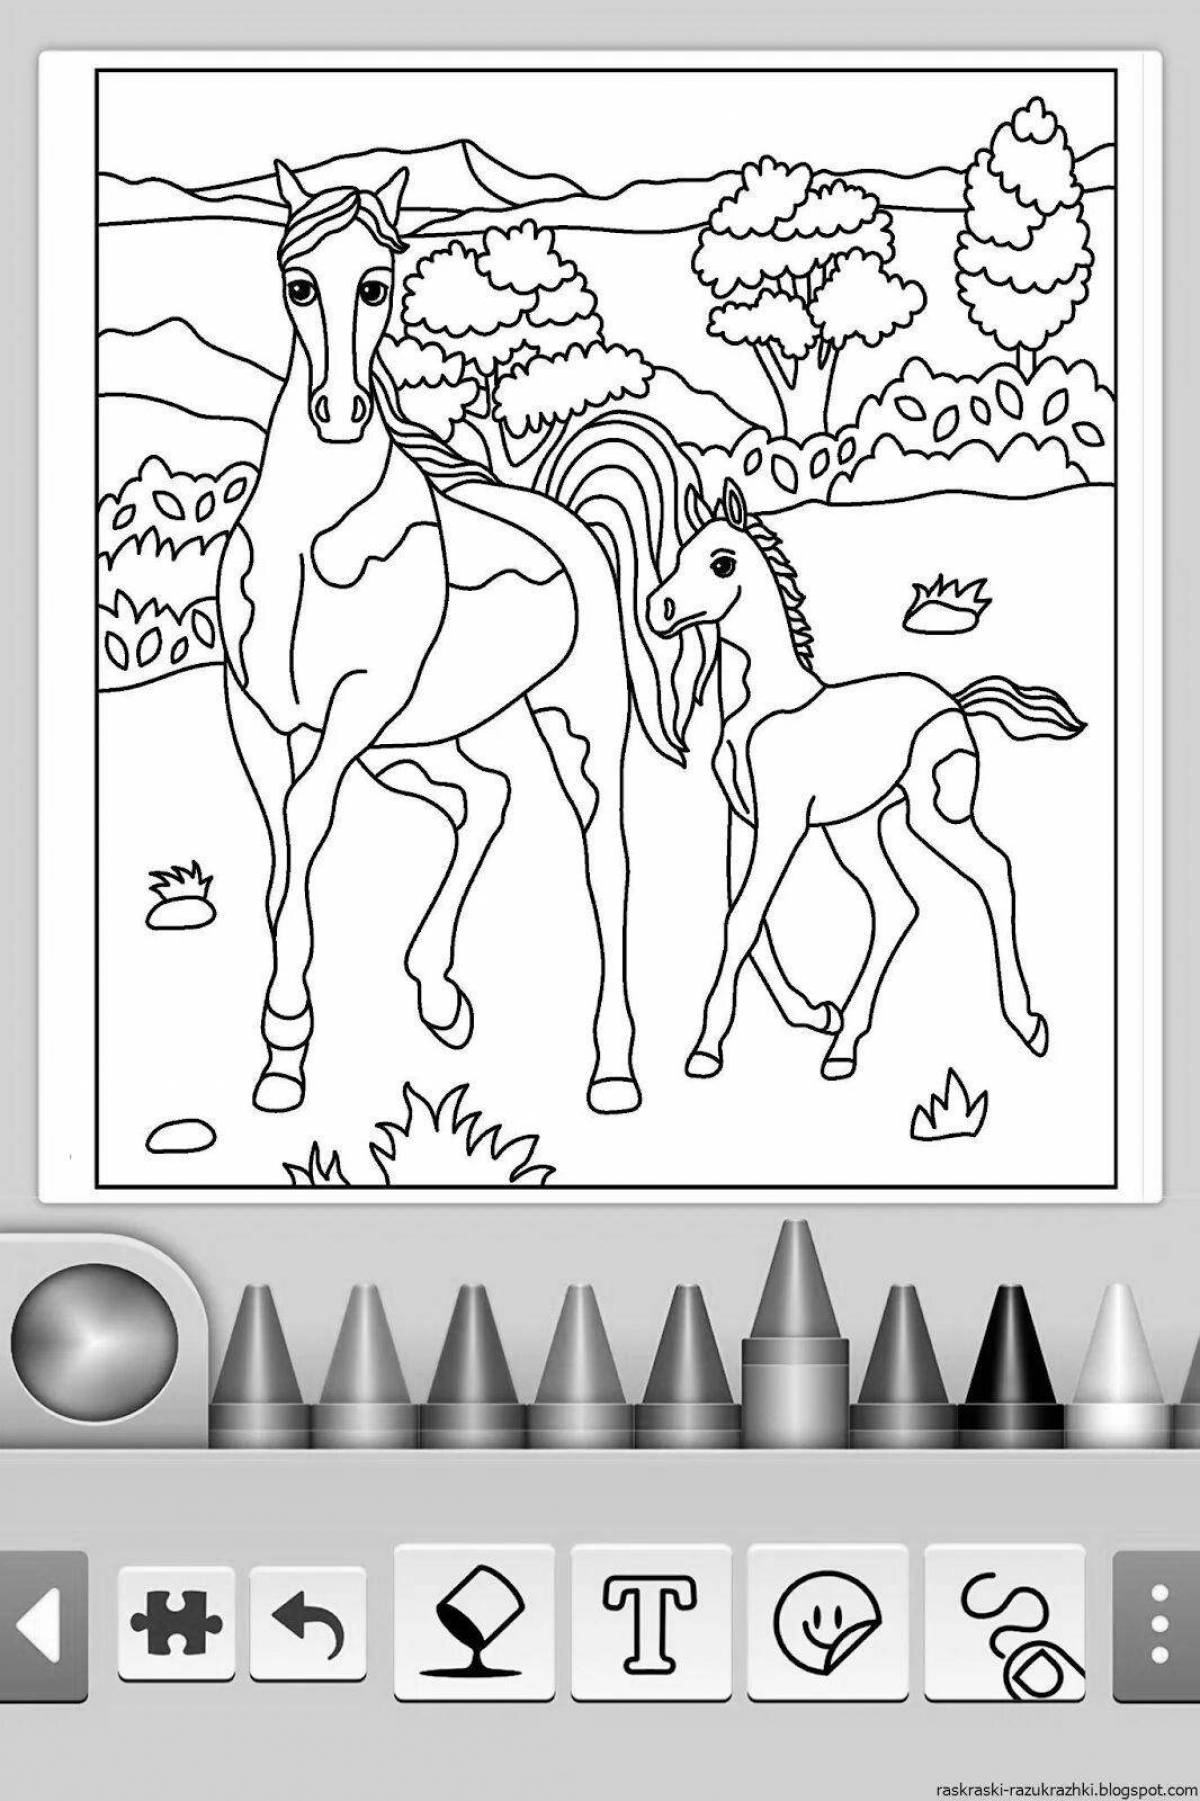 Joyful coloring game for girls 3 years old